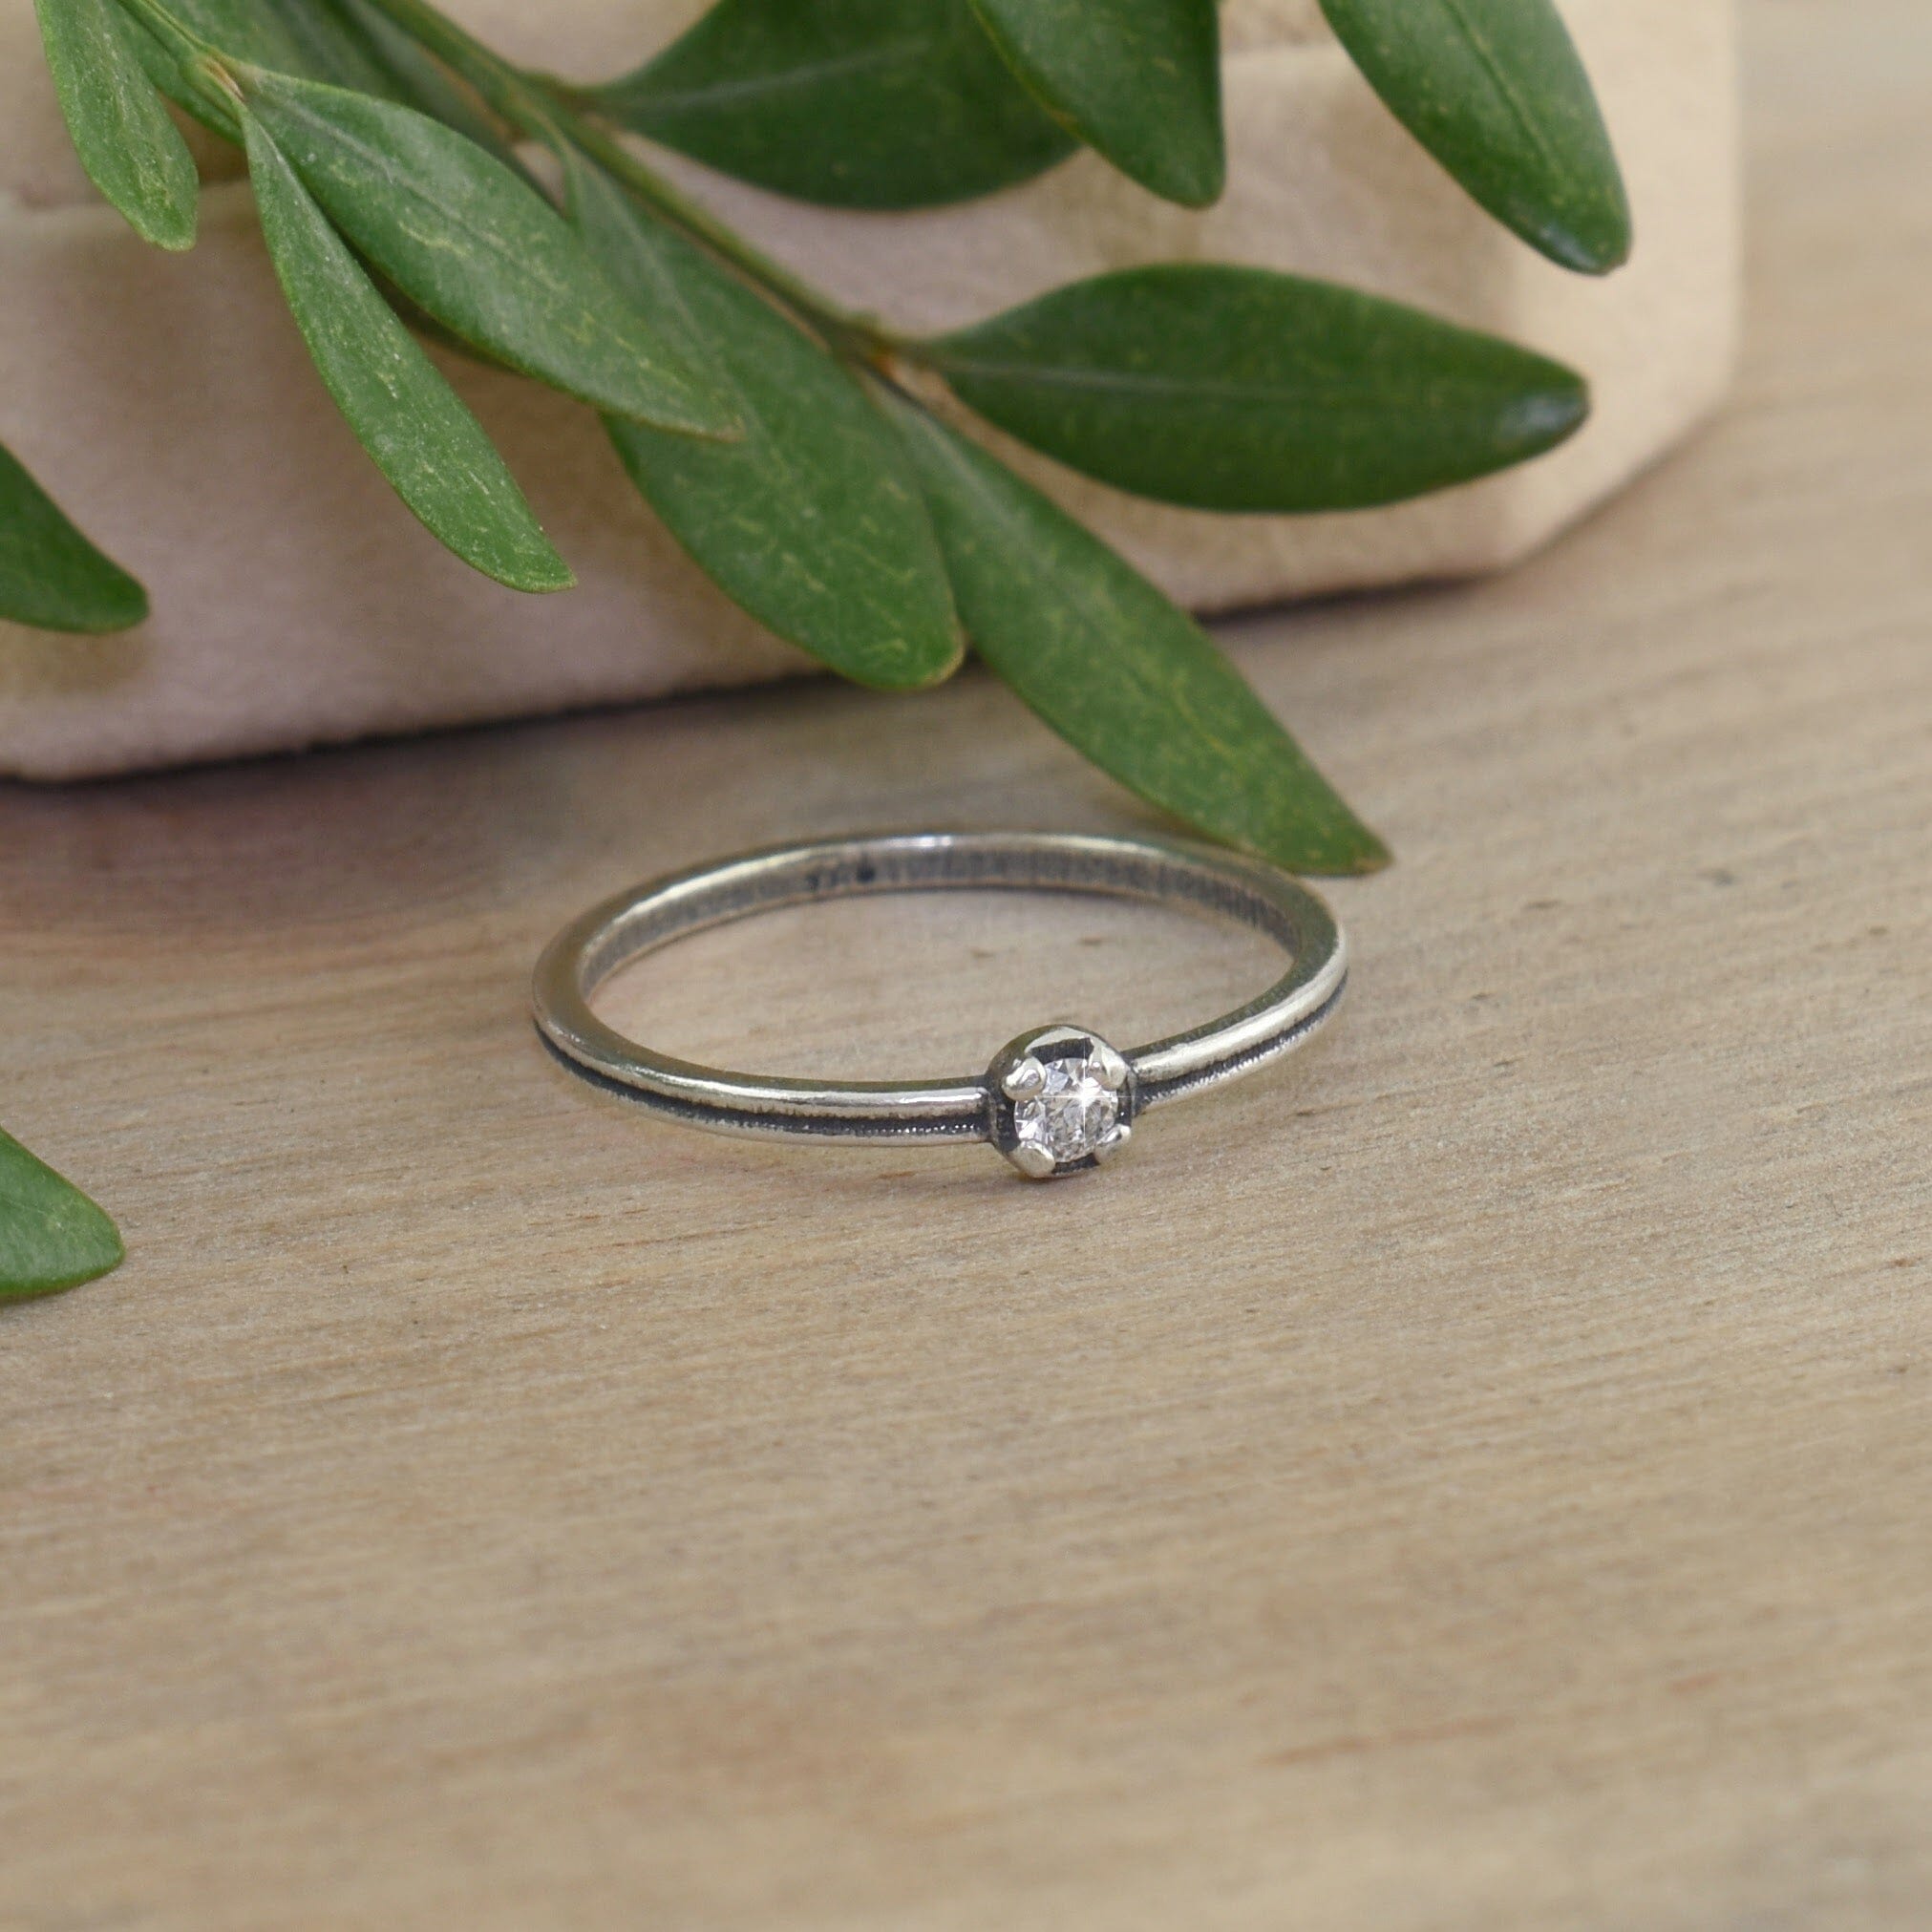 dainty .925 sterling silver ring featuring a diamond